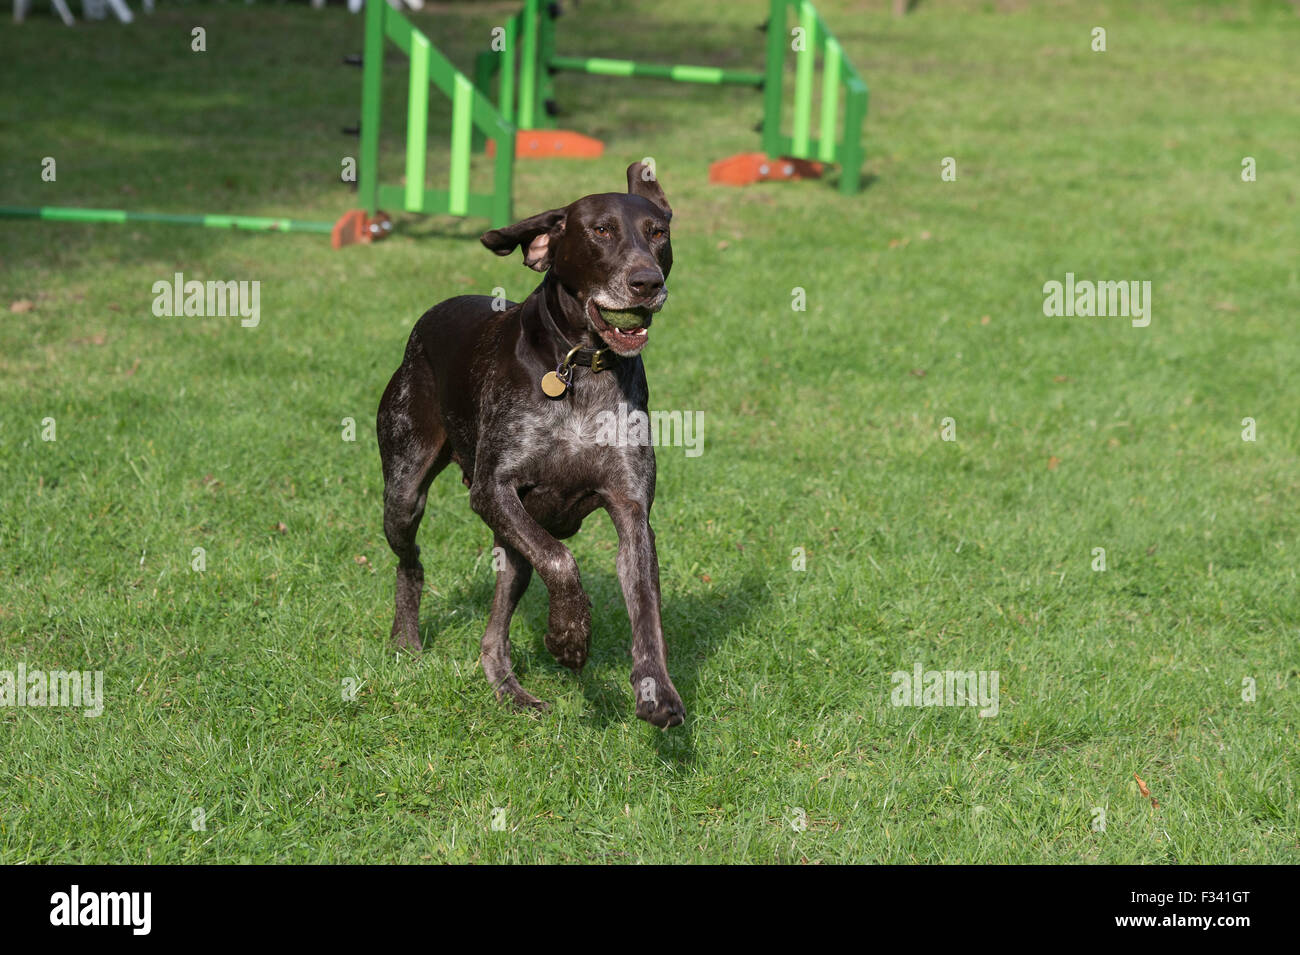 A German Shorthaired Pointer running during an agility training session. Stock Photo